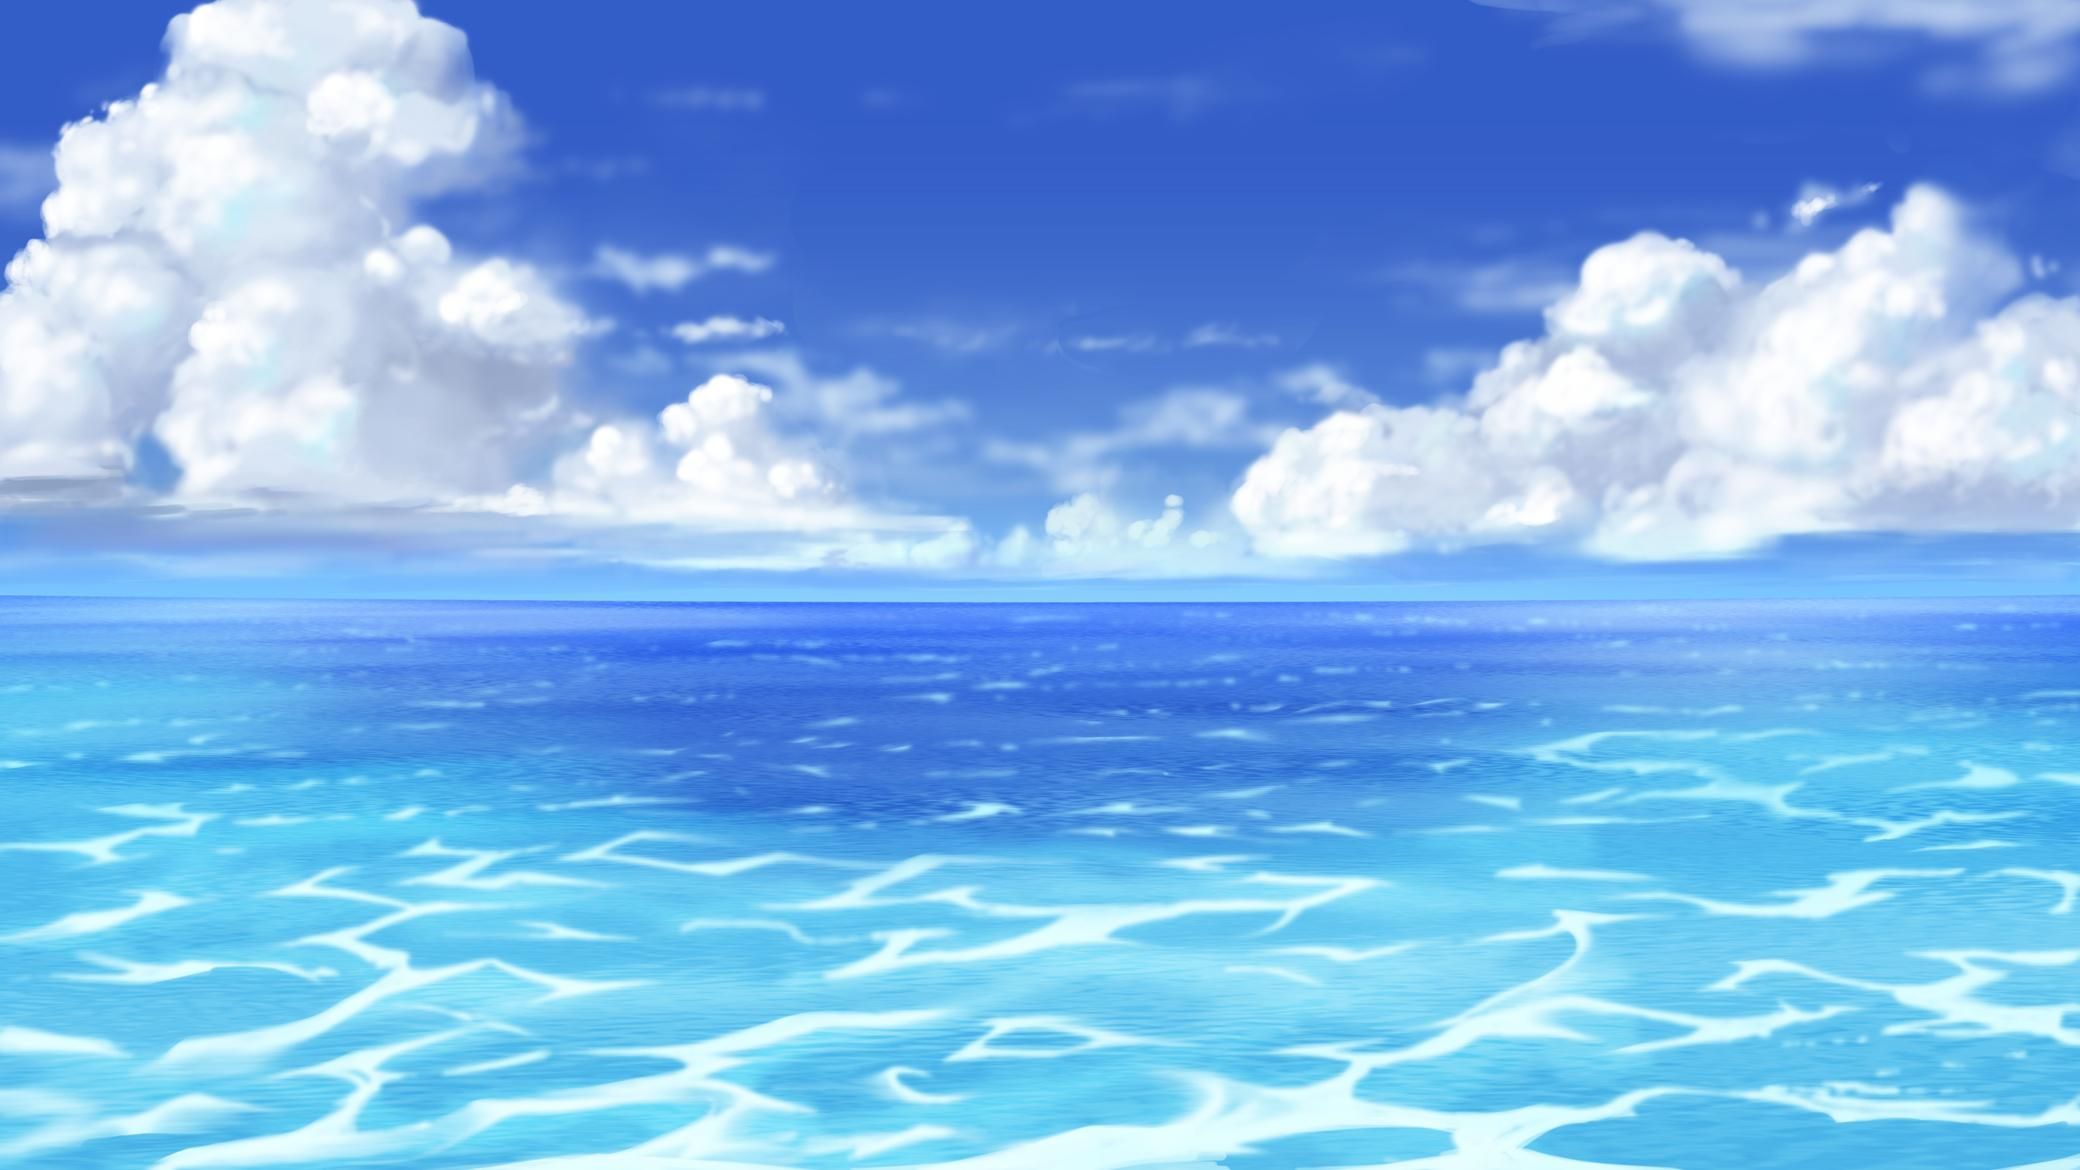 HD wallpaper anime girl clouds water walking on water one person  nature  Wallpaper Flare